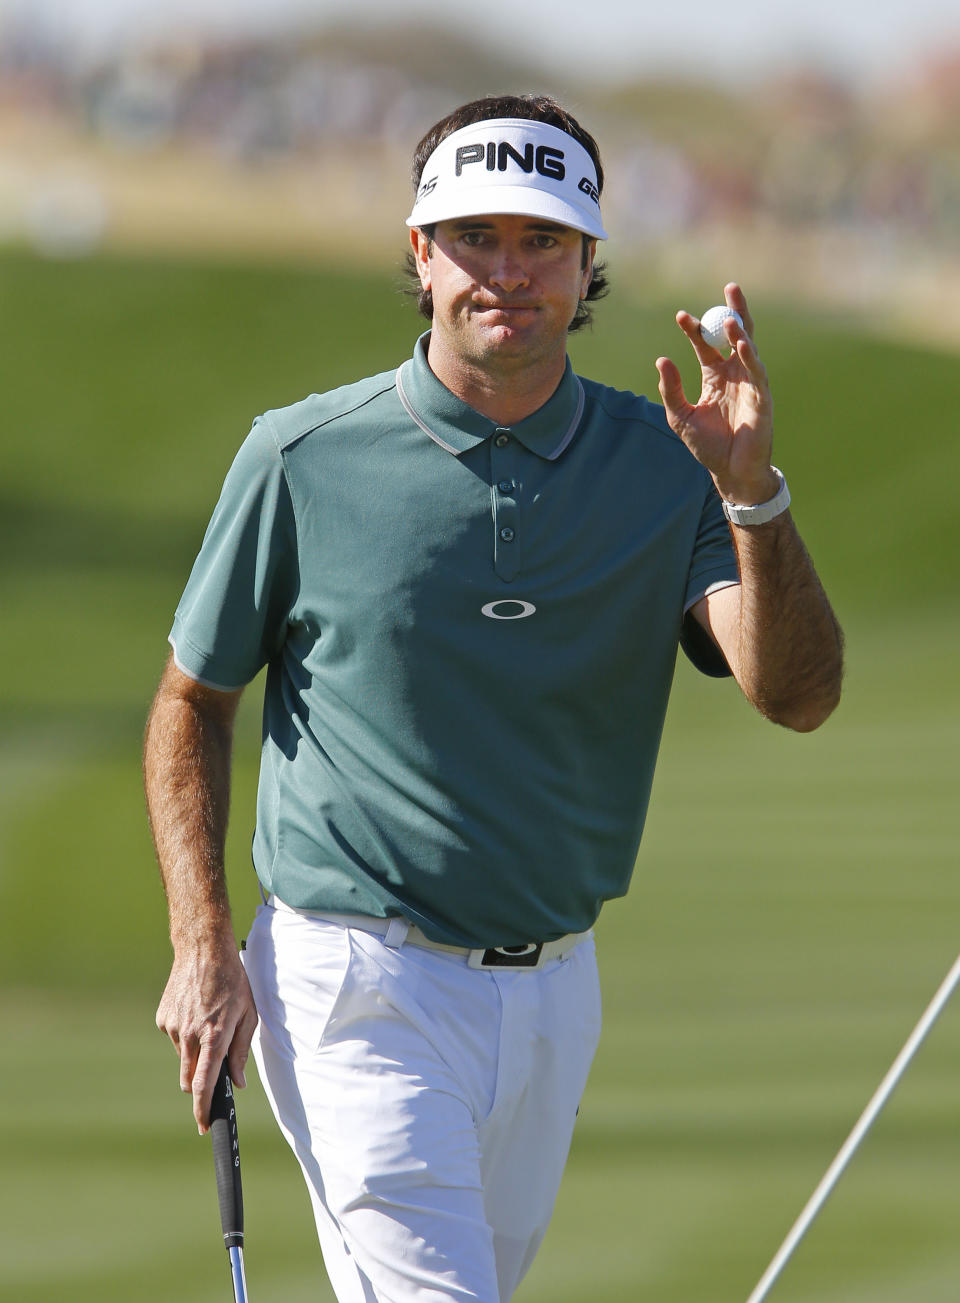 Bubba Watson waves to the gallery after making his putt on the ninth green during the third round of the Phoenix Open golf tournament Saturday, Feb. 1, 2014, in Scottsdale, Ariz. (AP Photo/The Arizona Republic, David Kadlubowski ) MARICOPA COUNTY OUT; MAGS OUT; NO SALES